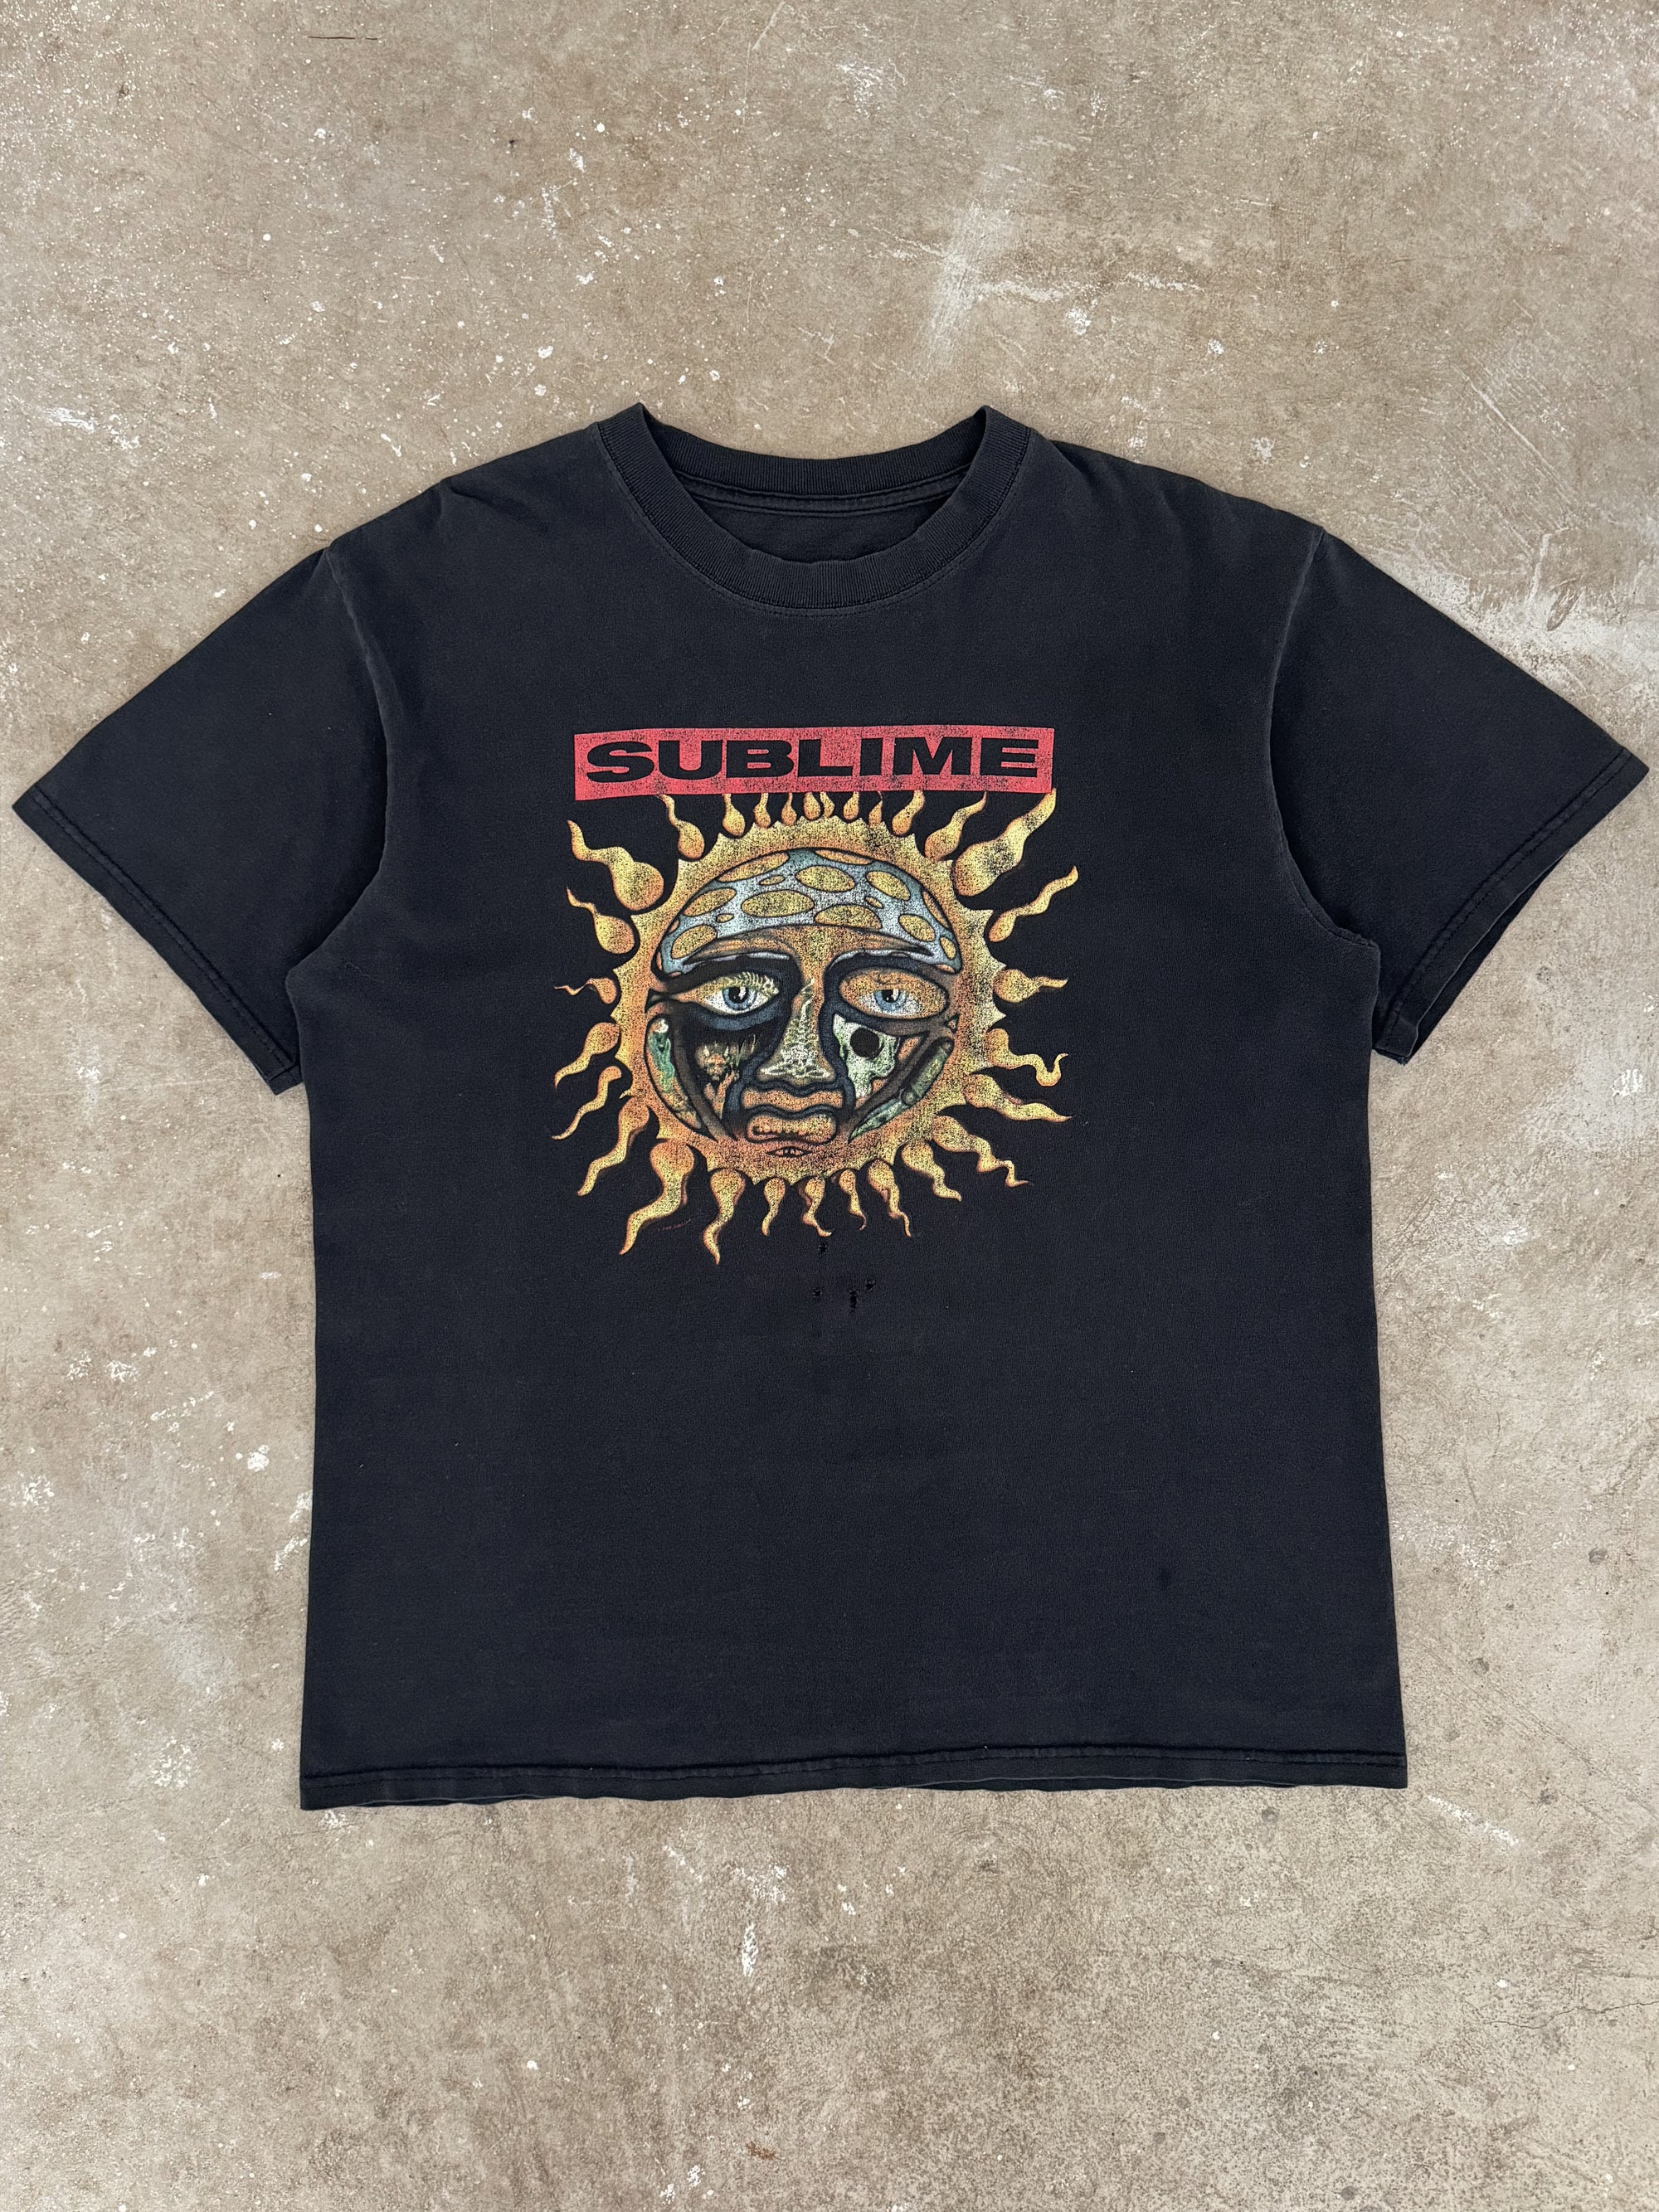 2000s "Sublime" Tee (L)